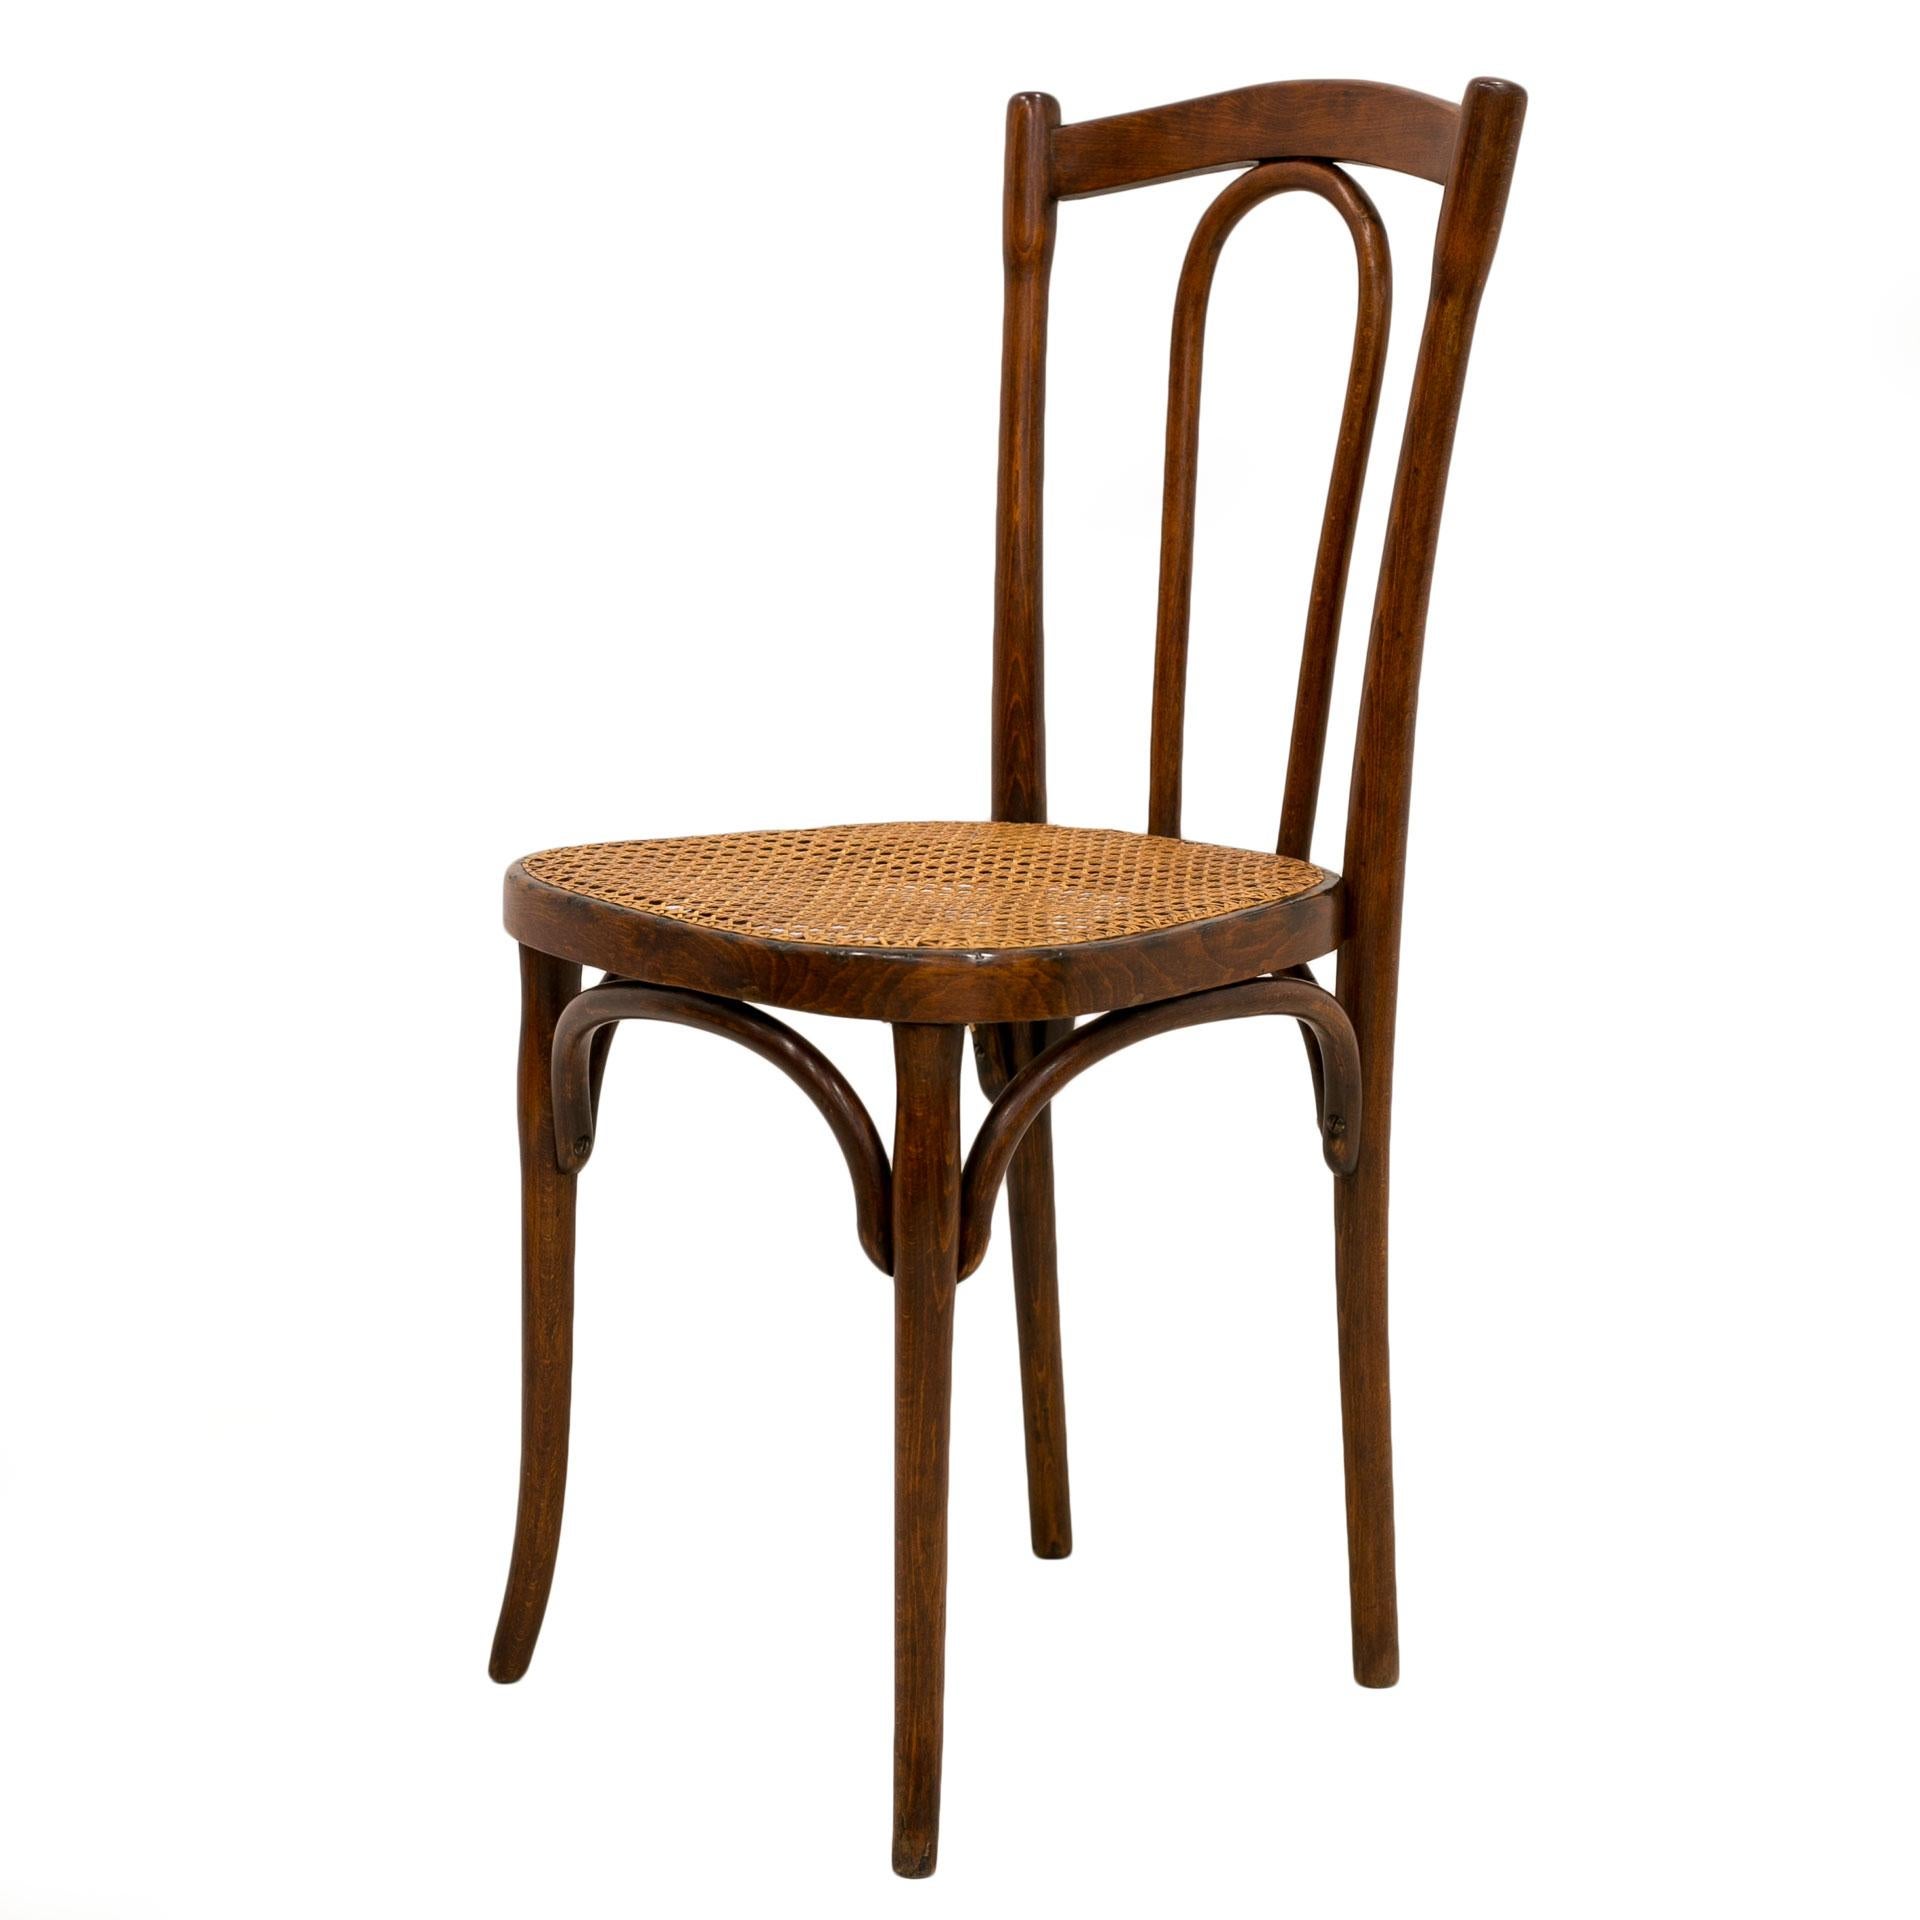 This is a set of classic bentwood chairs by Michael Thonet. The set comes from Austria from 1920s. The chairs are made of beech wood with a traditional cane plaited seating. The chairs are in very good condition, after a subtle renovation.